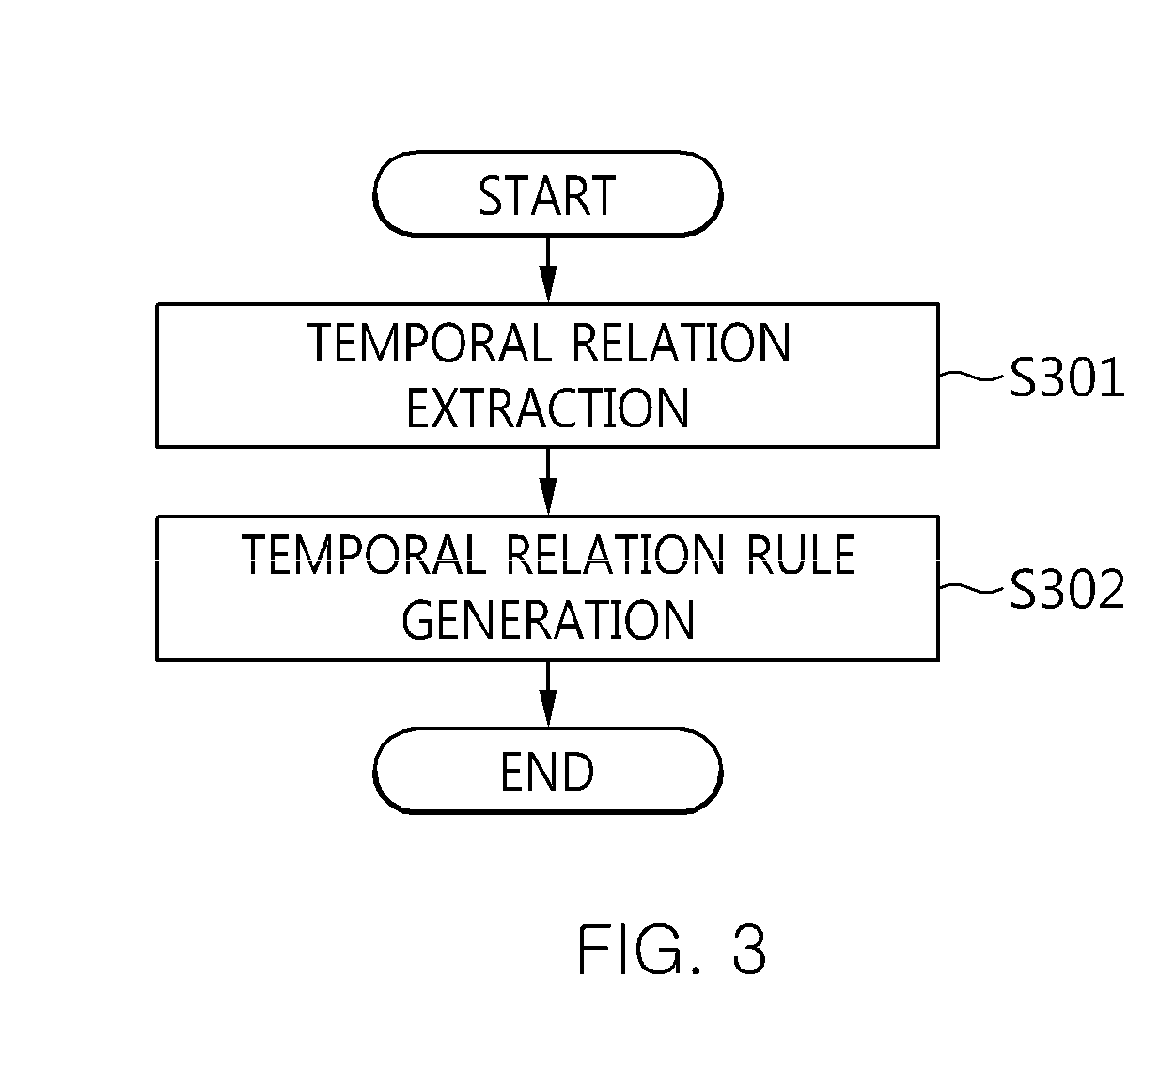 Method for parallel mining of temporal relations in large event file